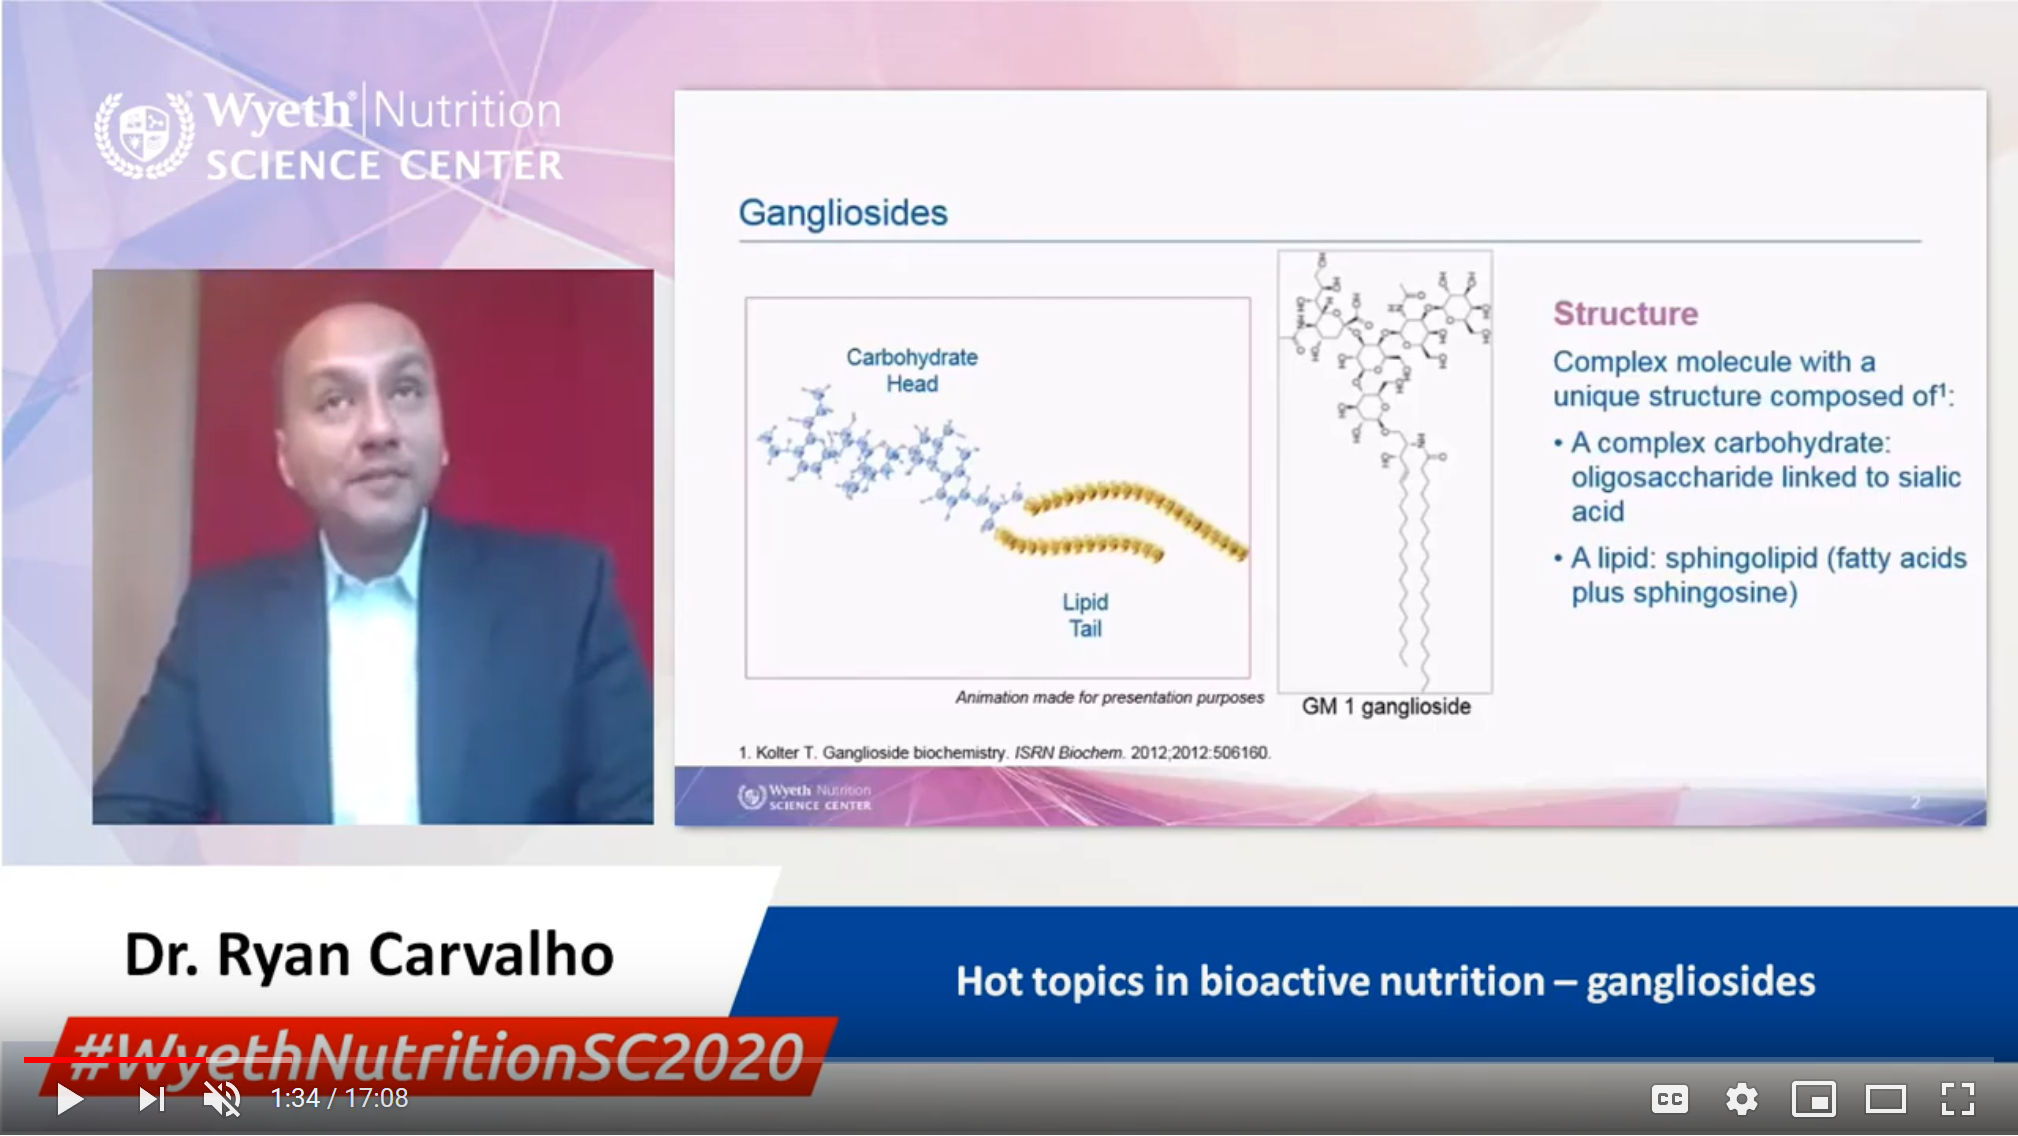 Hot topics in bioactive nutrition – gangliosides - Dr. Ryan Carvalho